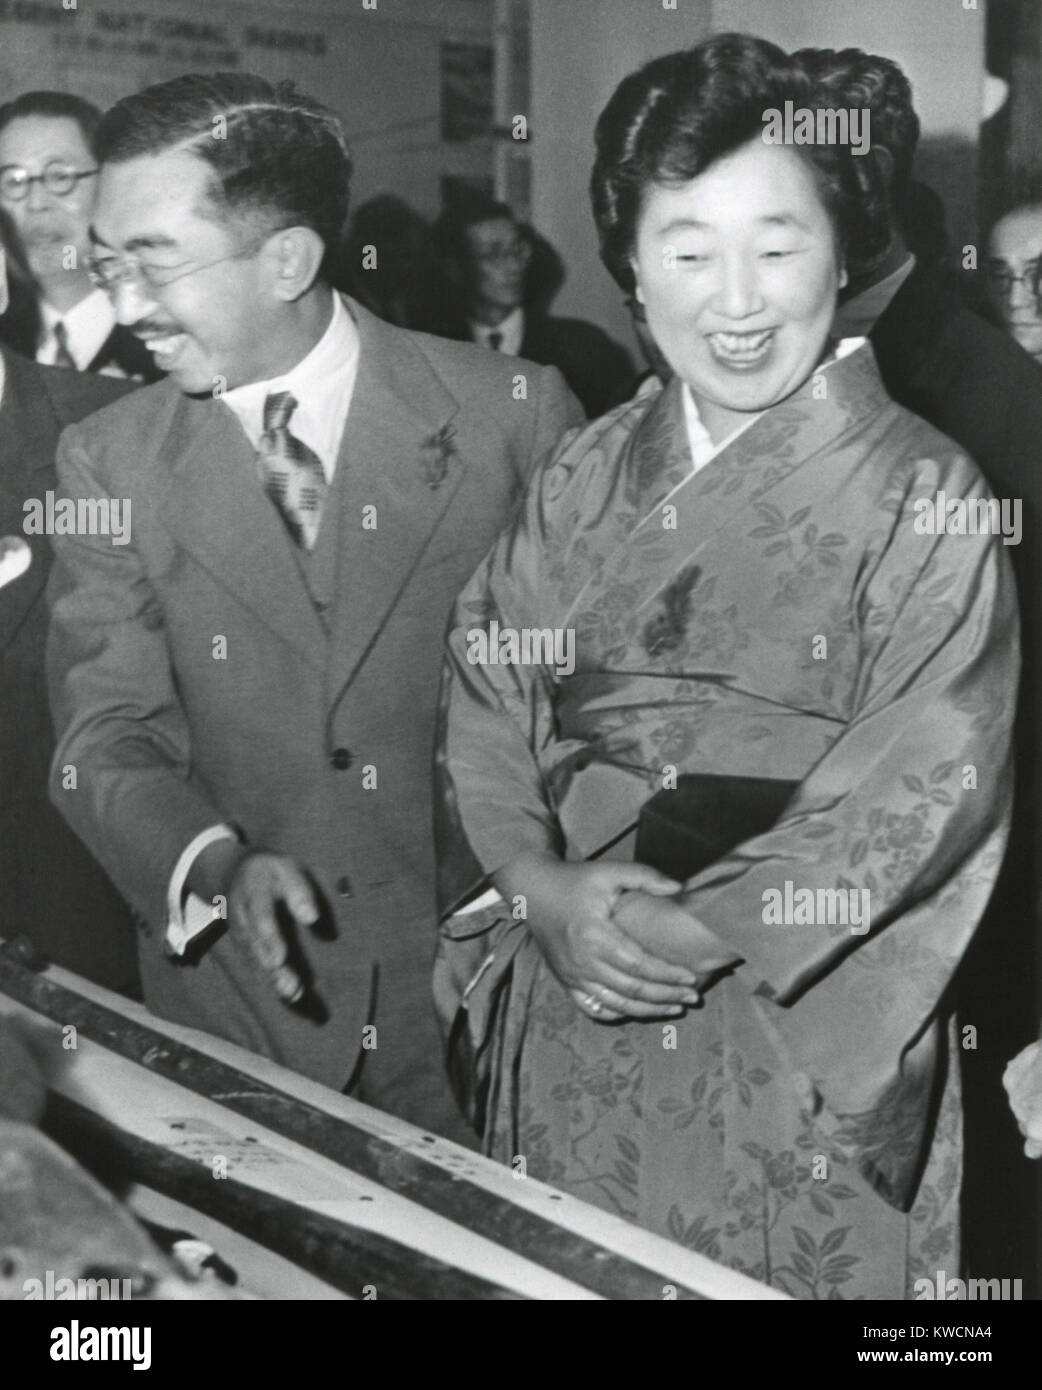 Emperor Hirohito and Empress Nagako at an exhibition at a Tokyo Department store. Oct. 27, 1949. Both wear small red feathers showing they contributed to the Japanese Community Chest Drive. - (BSLOC_2014_15_141) Stock Photo